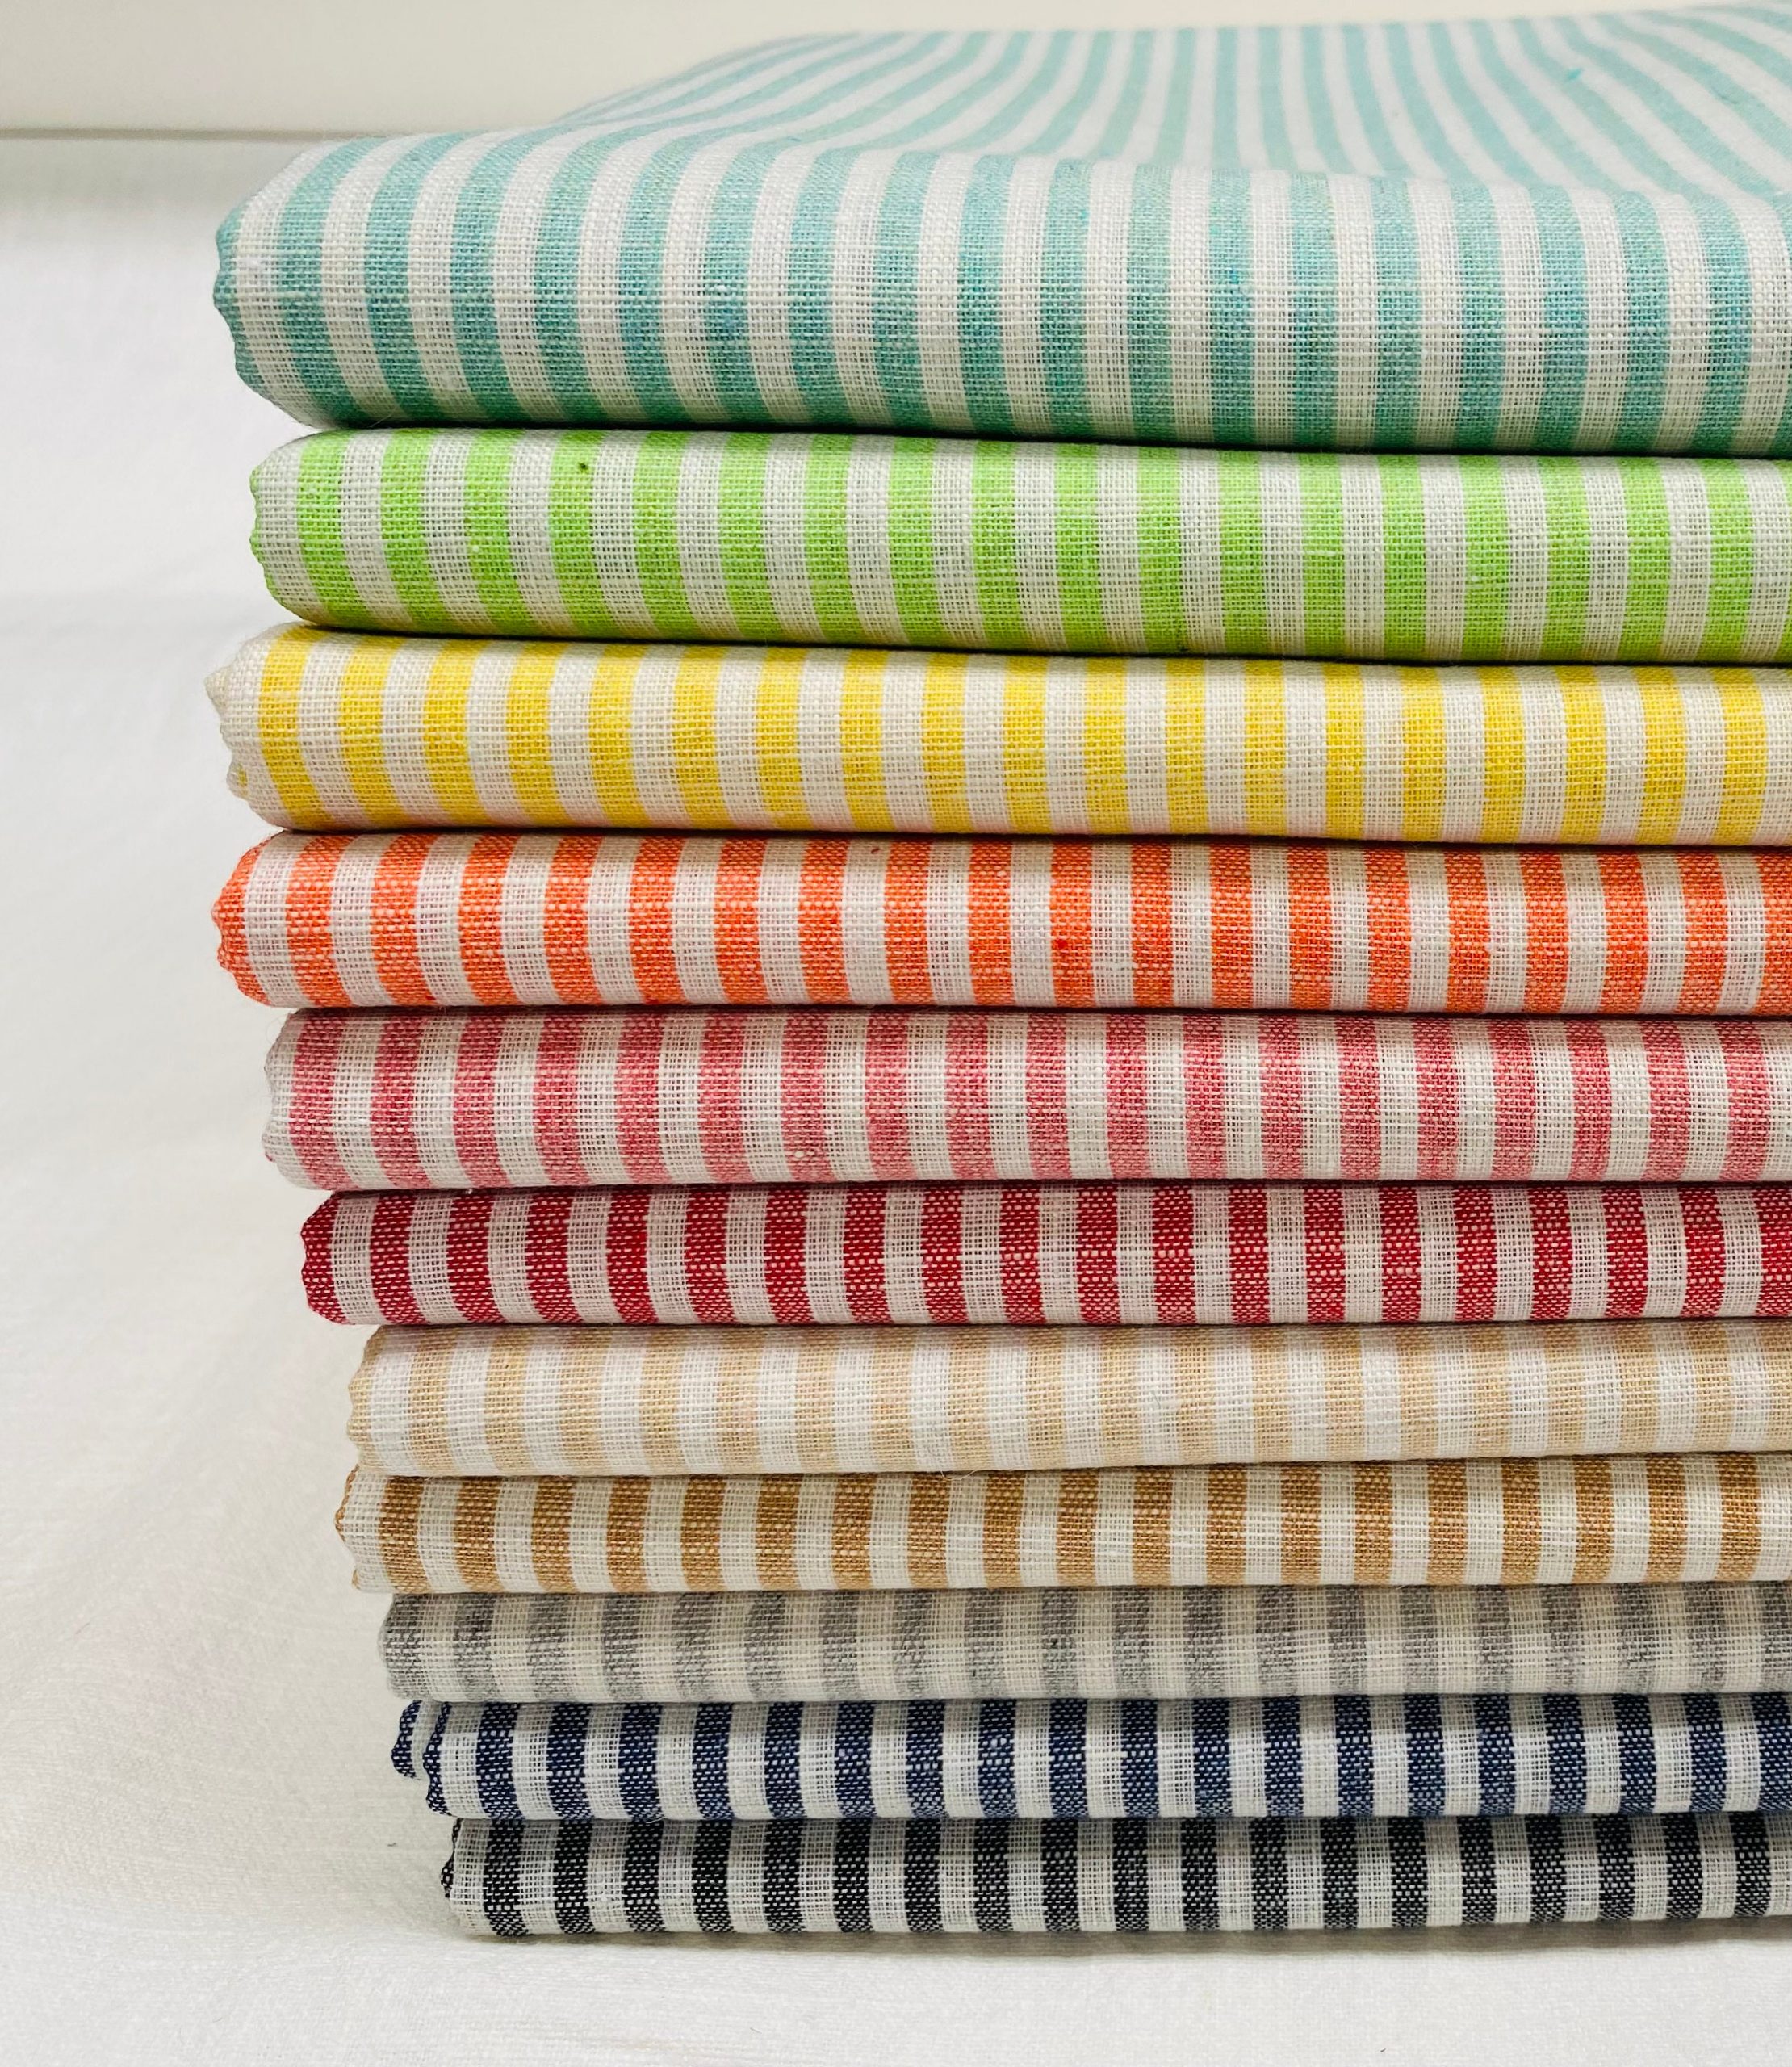 Candy Stripe Linen Fabric Light Cotton Material Cute Striped White Lines  Home Decor, Dressmaking - 59 or 150cm wide - Lush Fabric